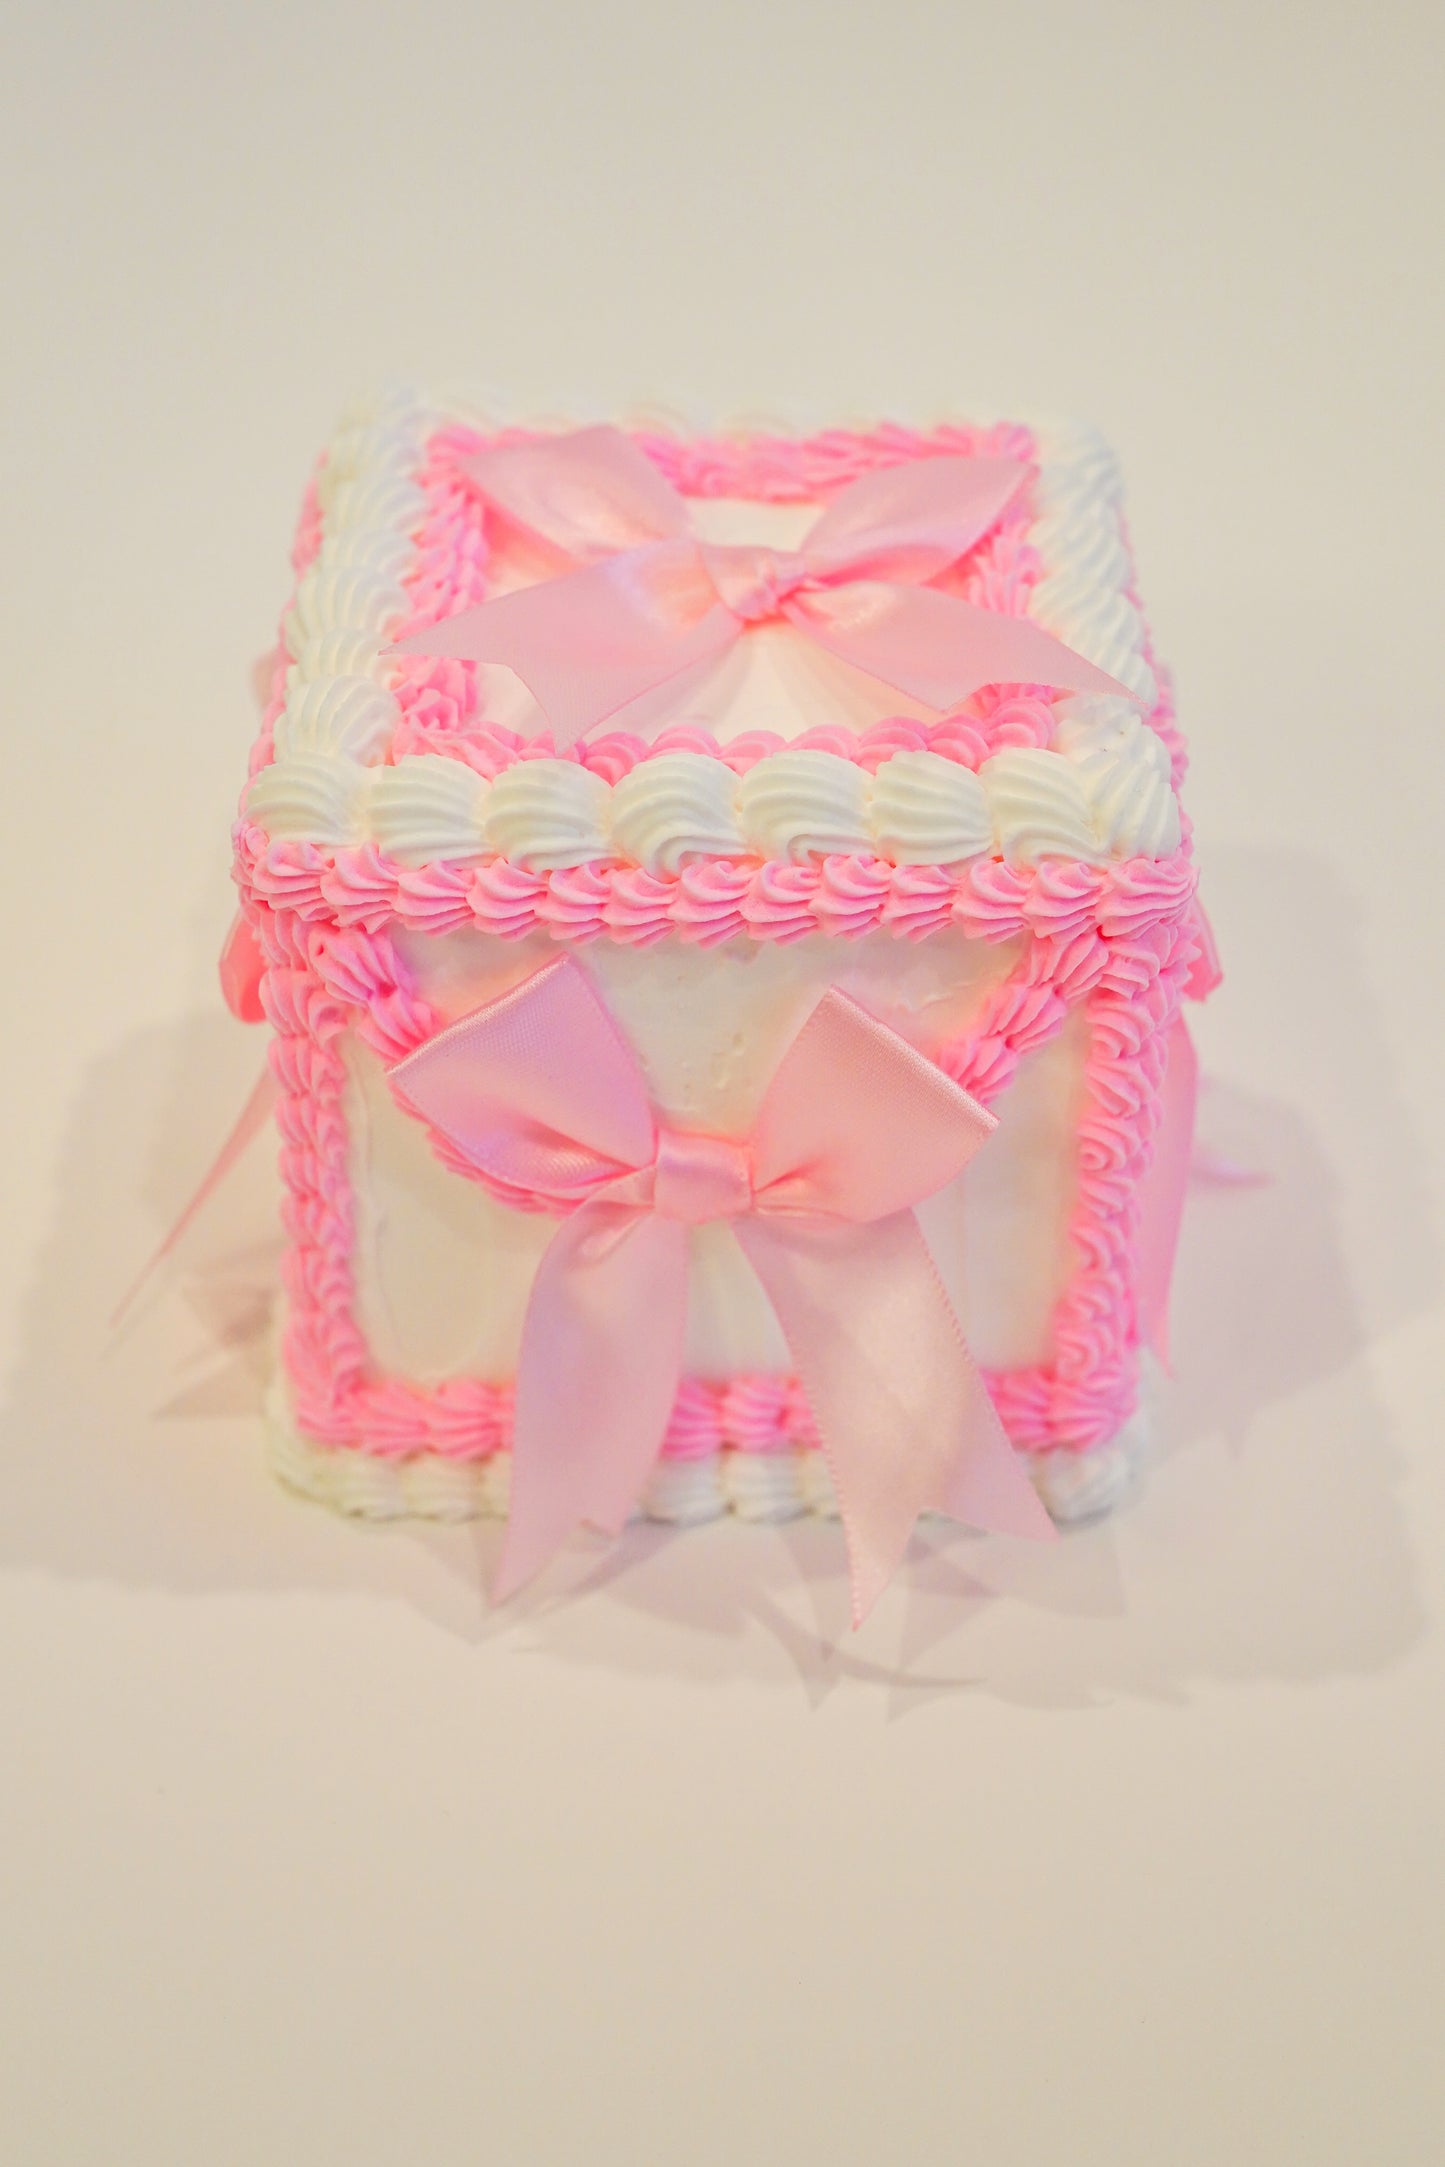 Vintage White and Pink Bow Square Small Cake